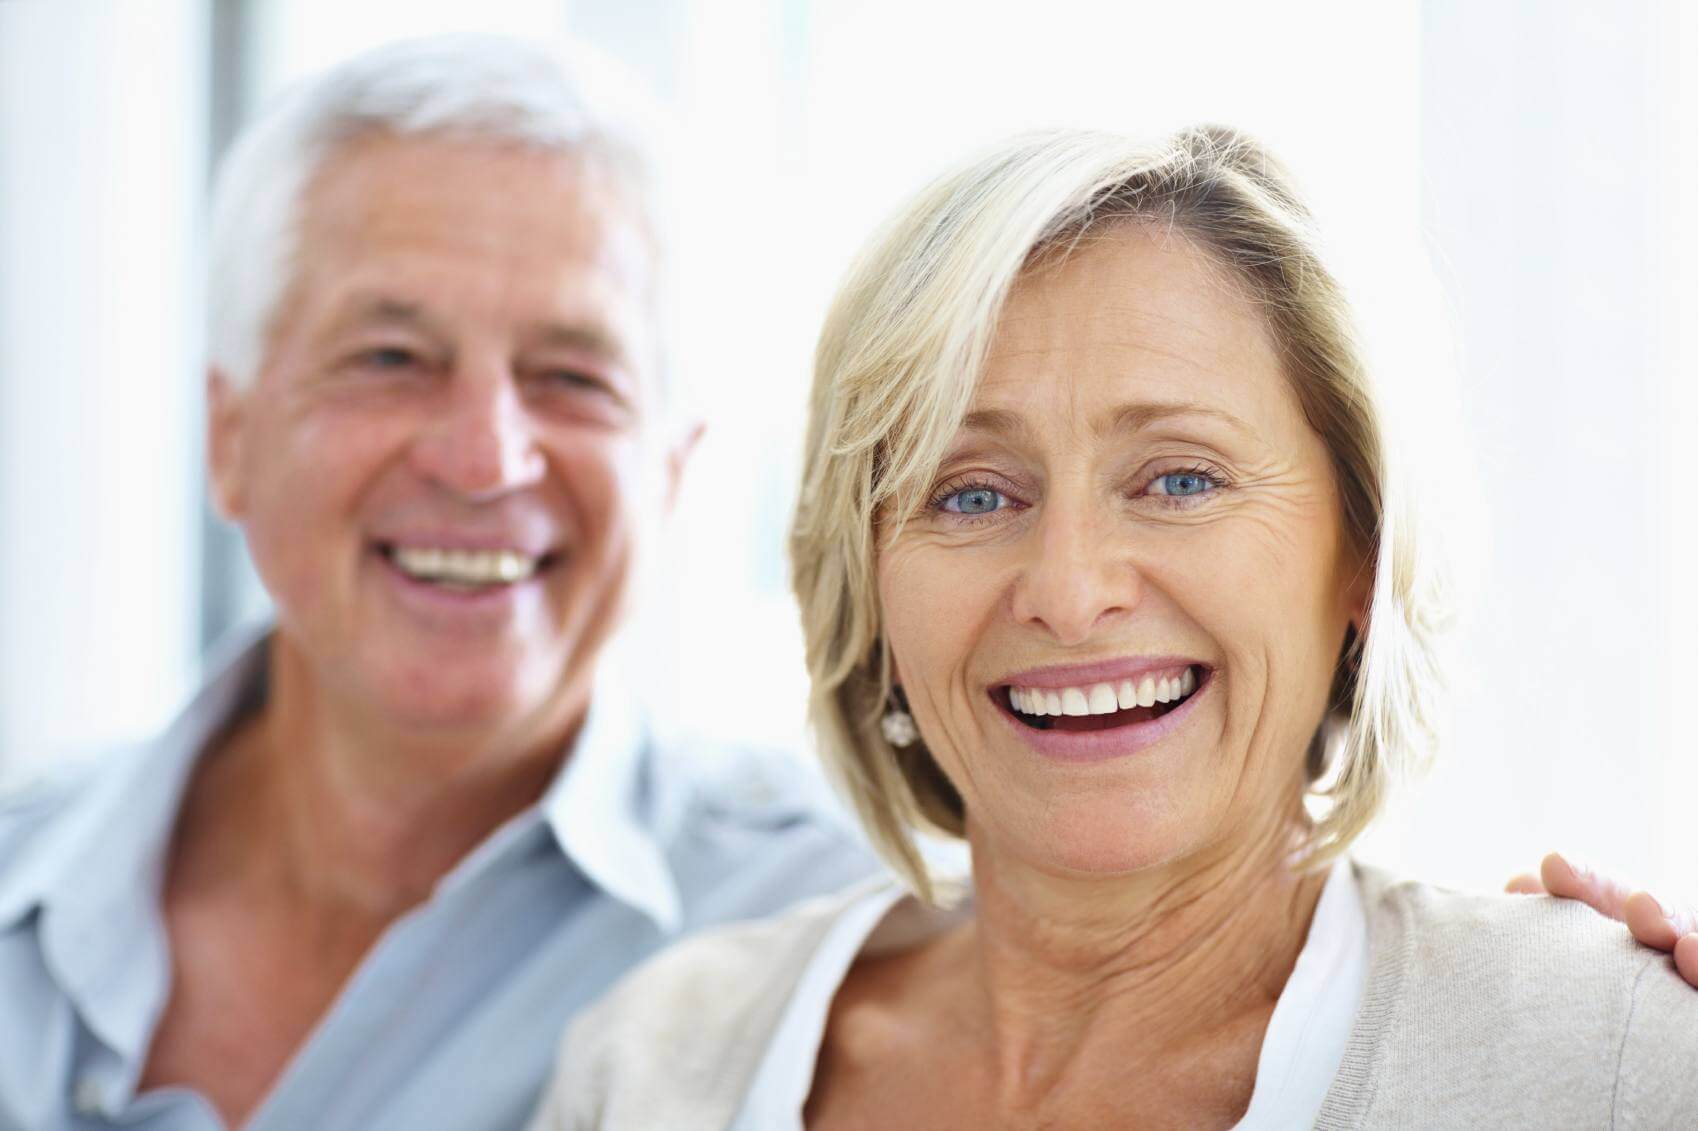 Mature Female Smiling With Blurred Mature Male Behind Her With His Hand On Her Shoulder Copy